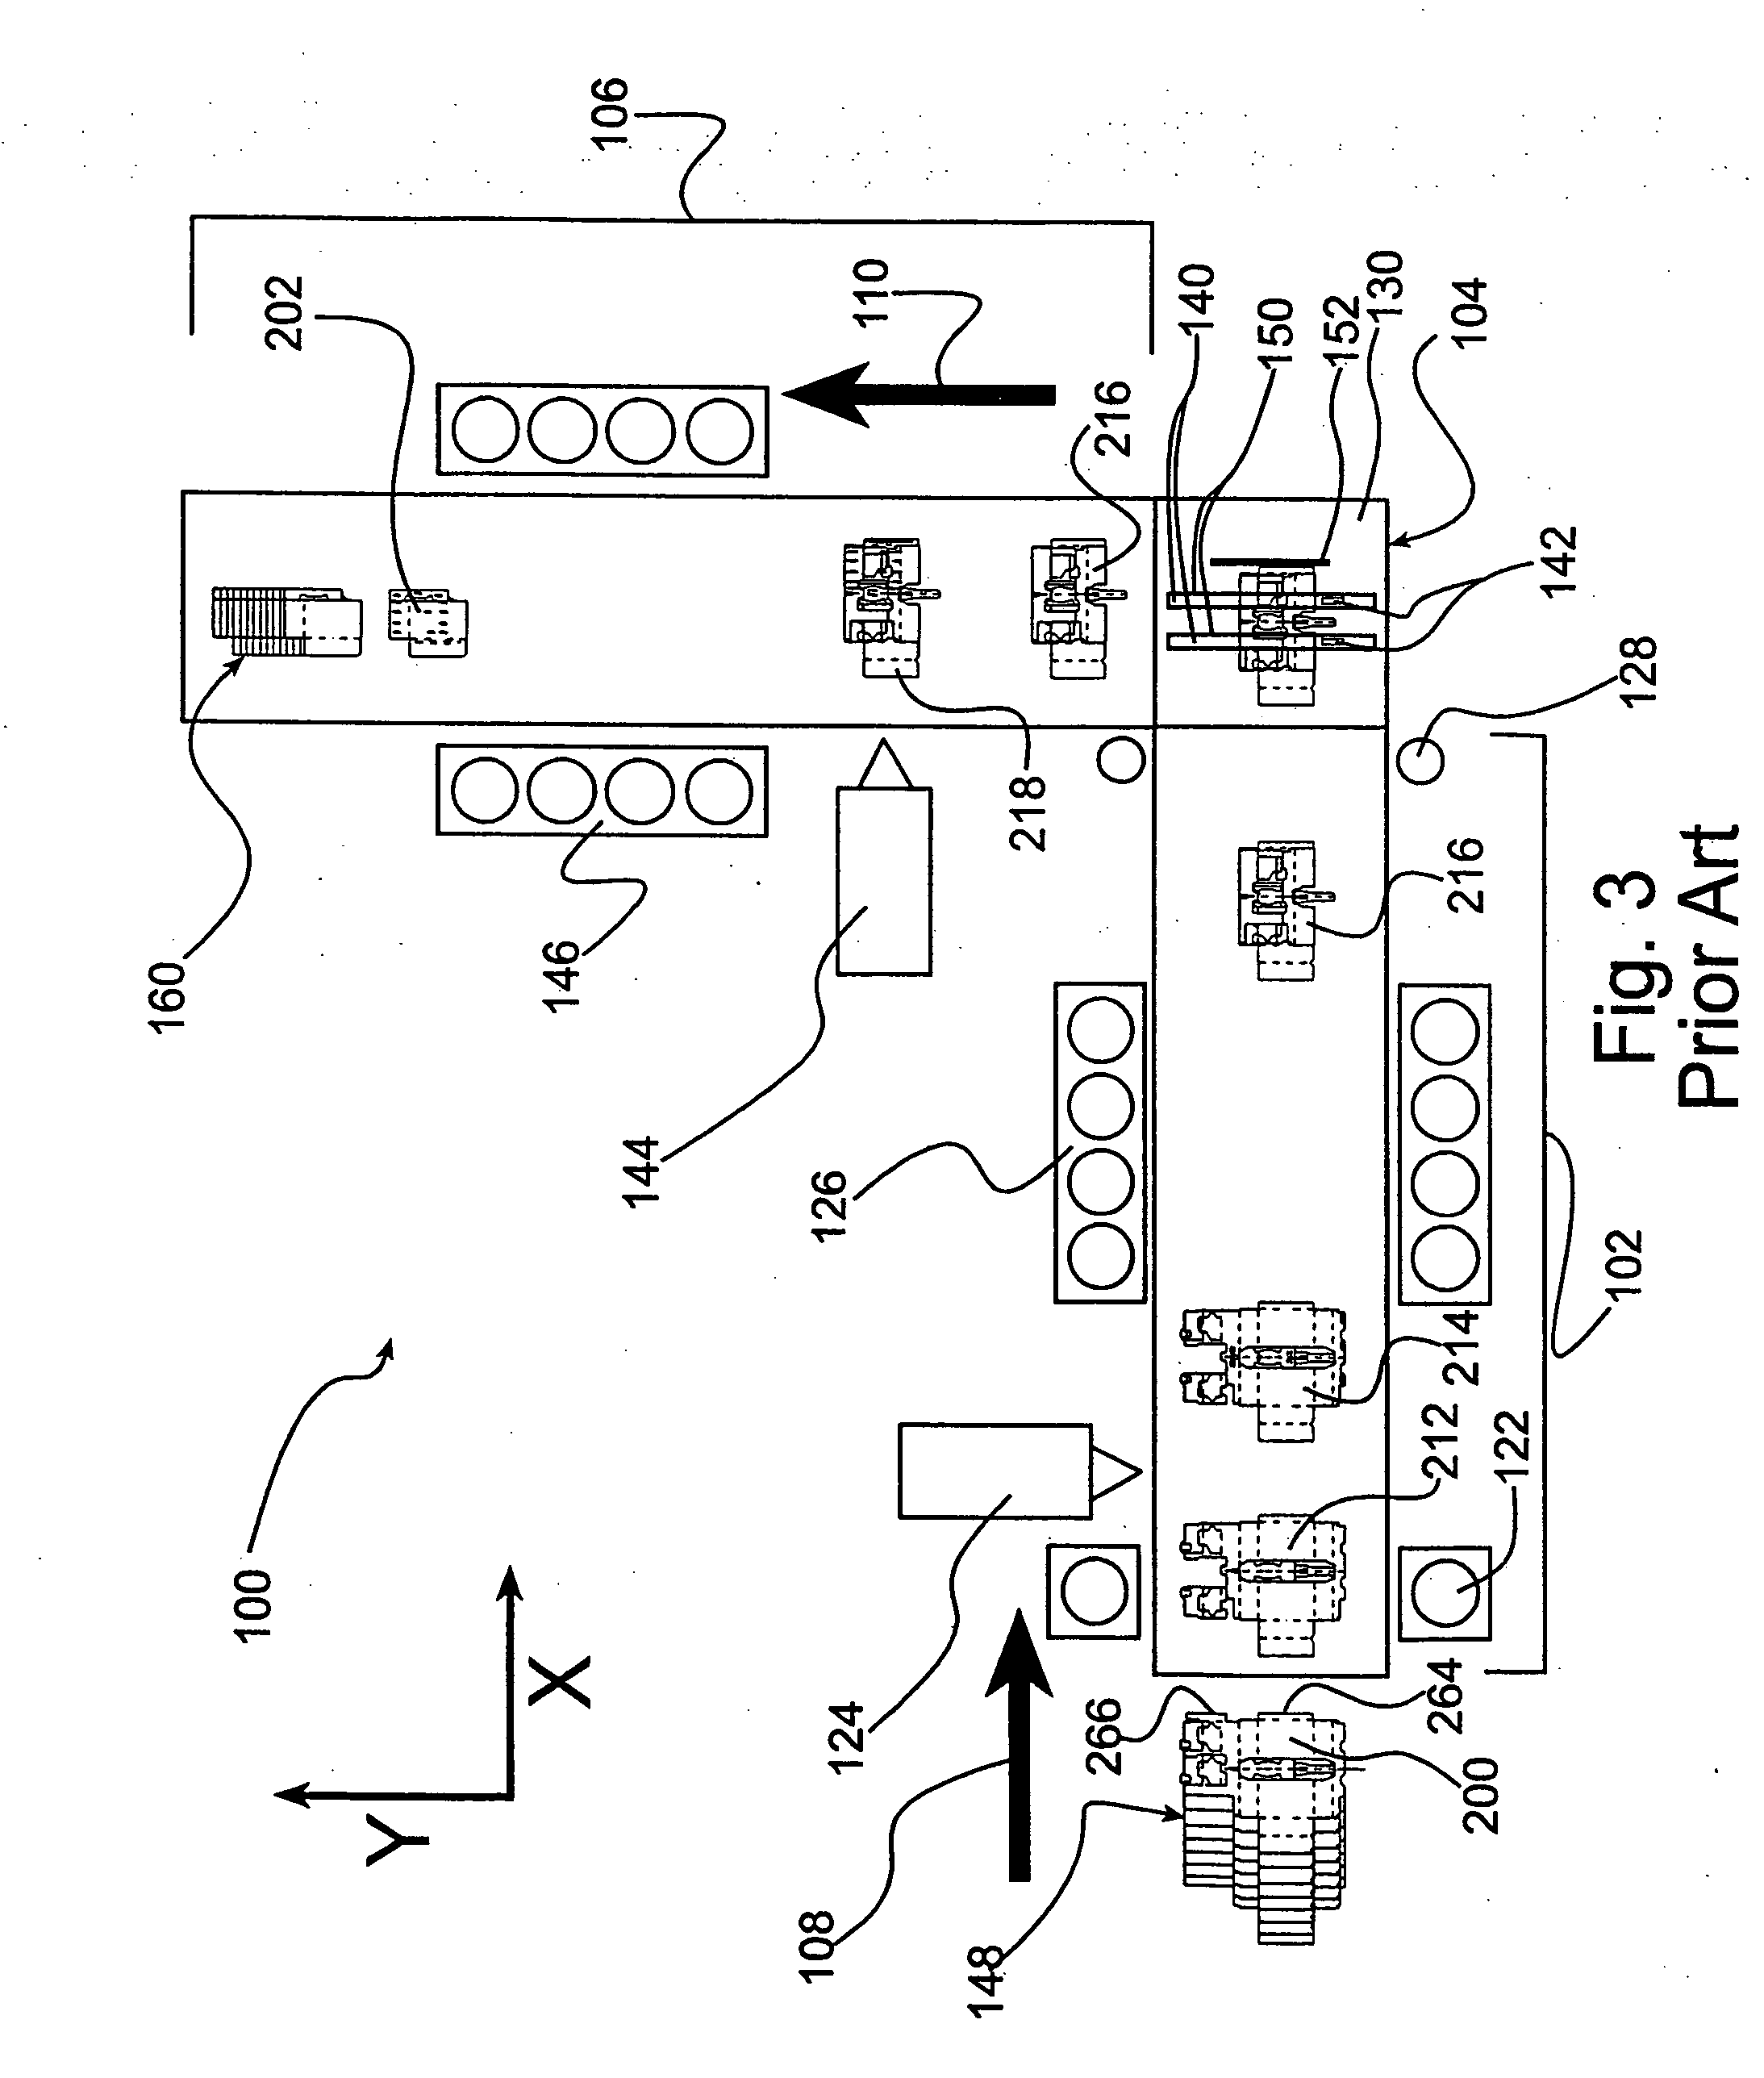 Transfer glue system and method for a right angle gluing machine